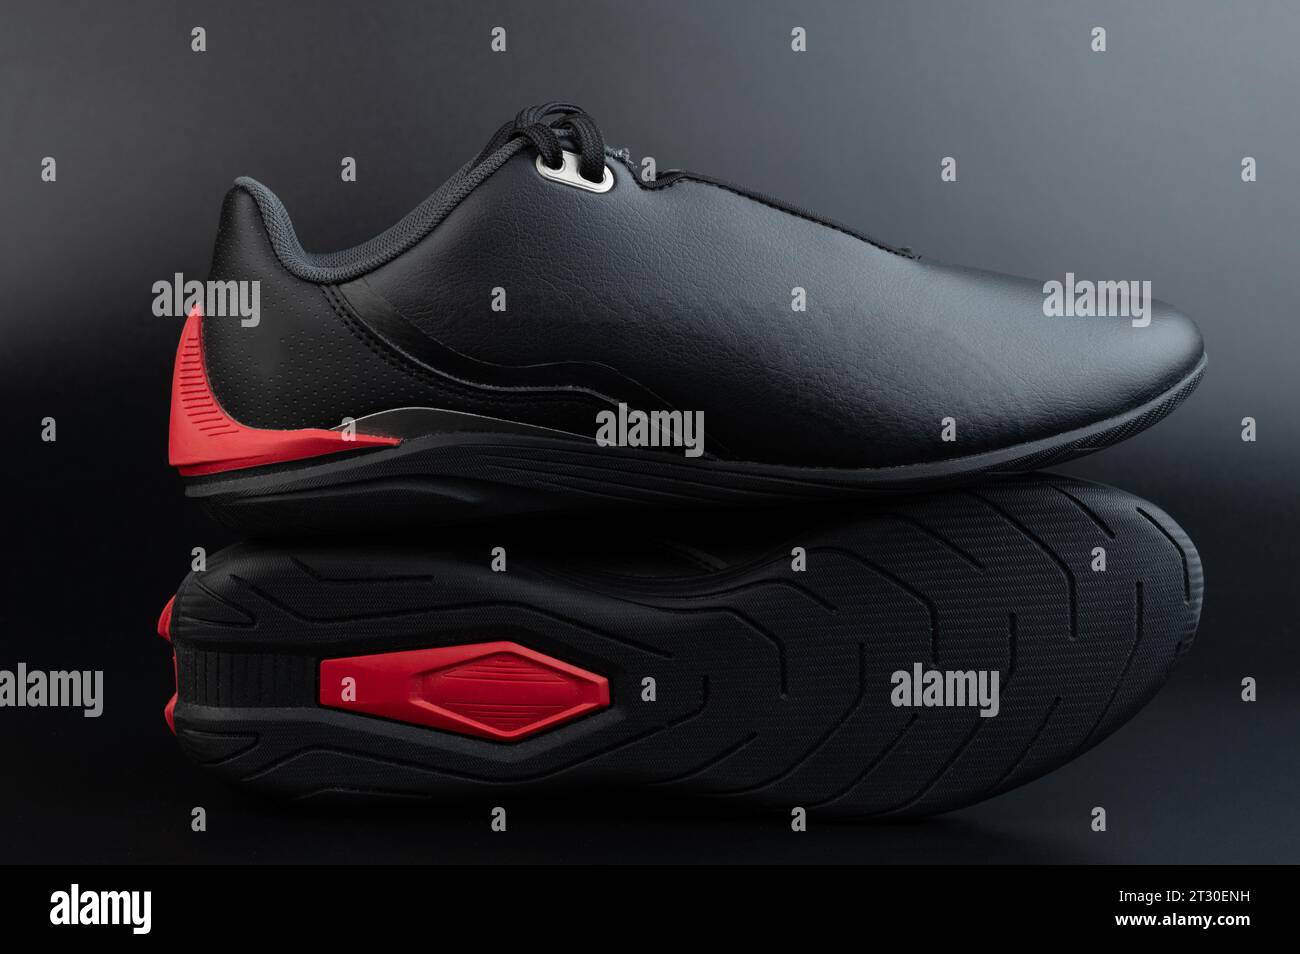 Black leather fitness shoes with red sole isolated on black studio background Stock Photo